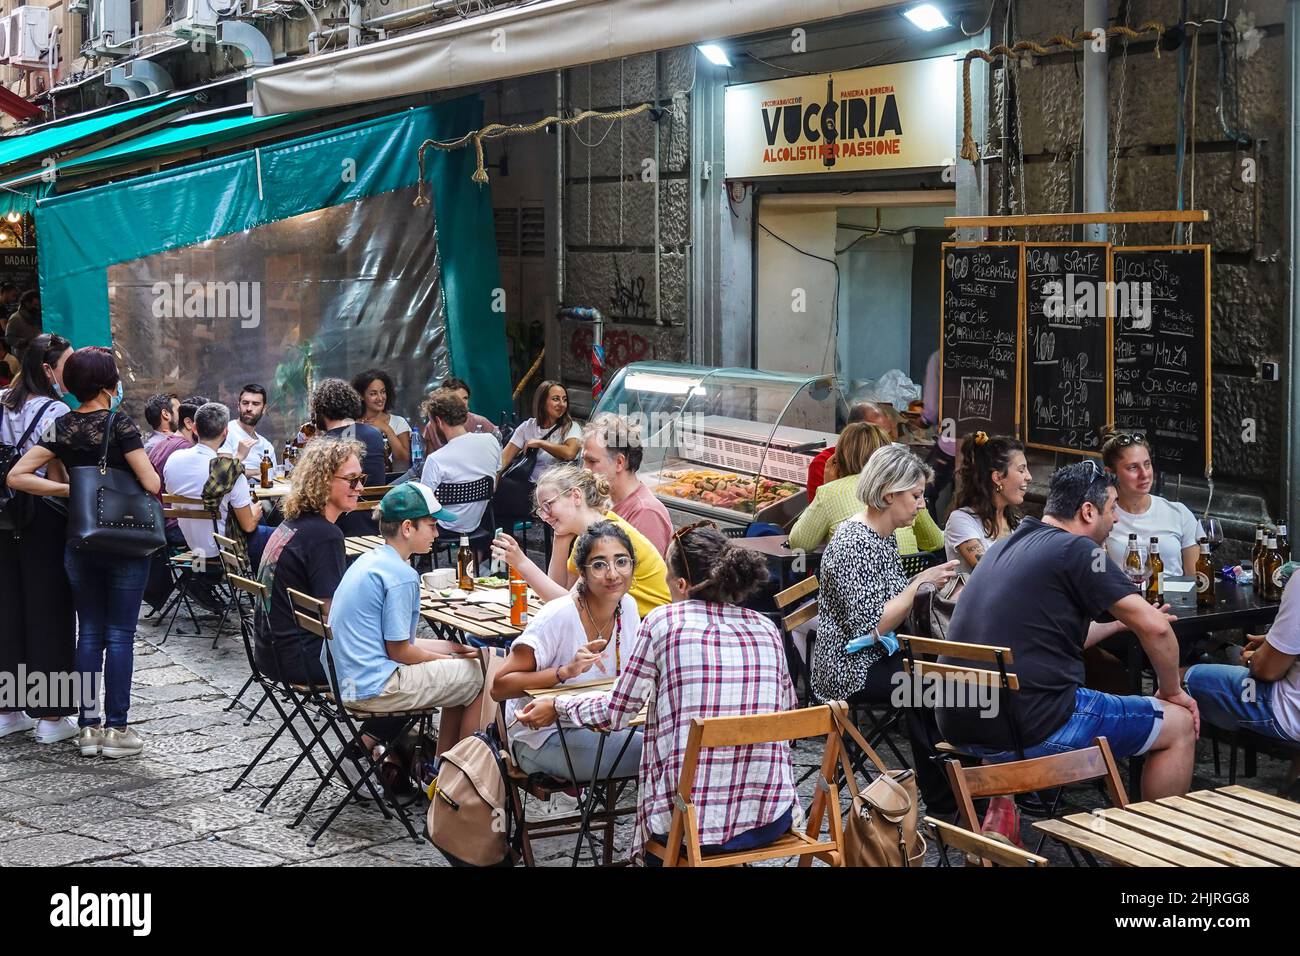 Palermo, Italy - October 23 2021: Local people and tourists have a drink in a street bar in the historic Vucciria market in Palermo in the largest cit Stock Photo